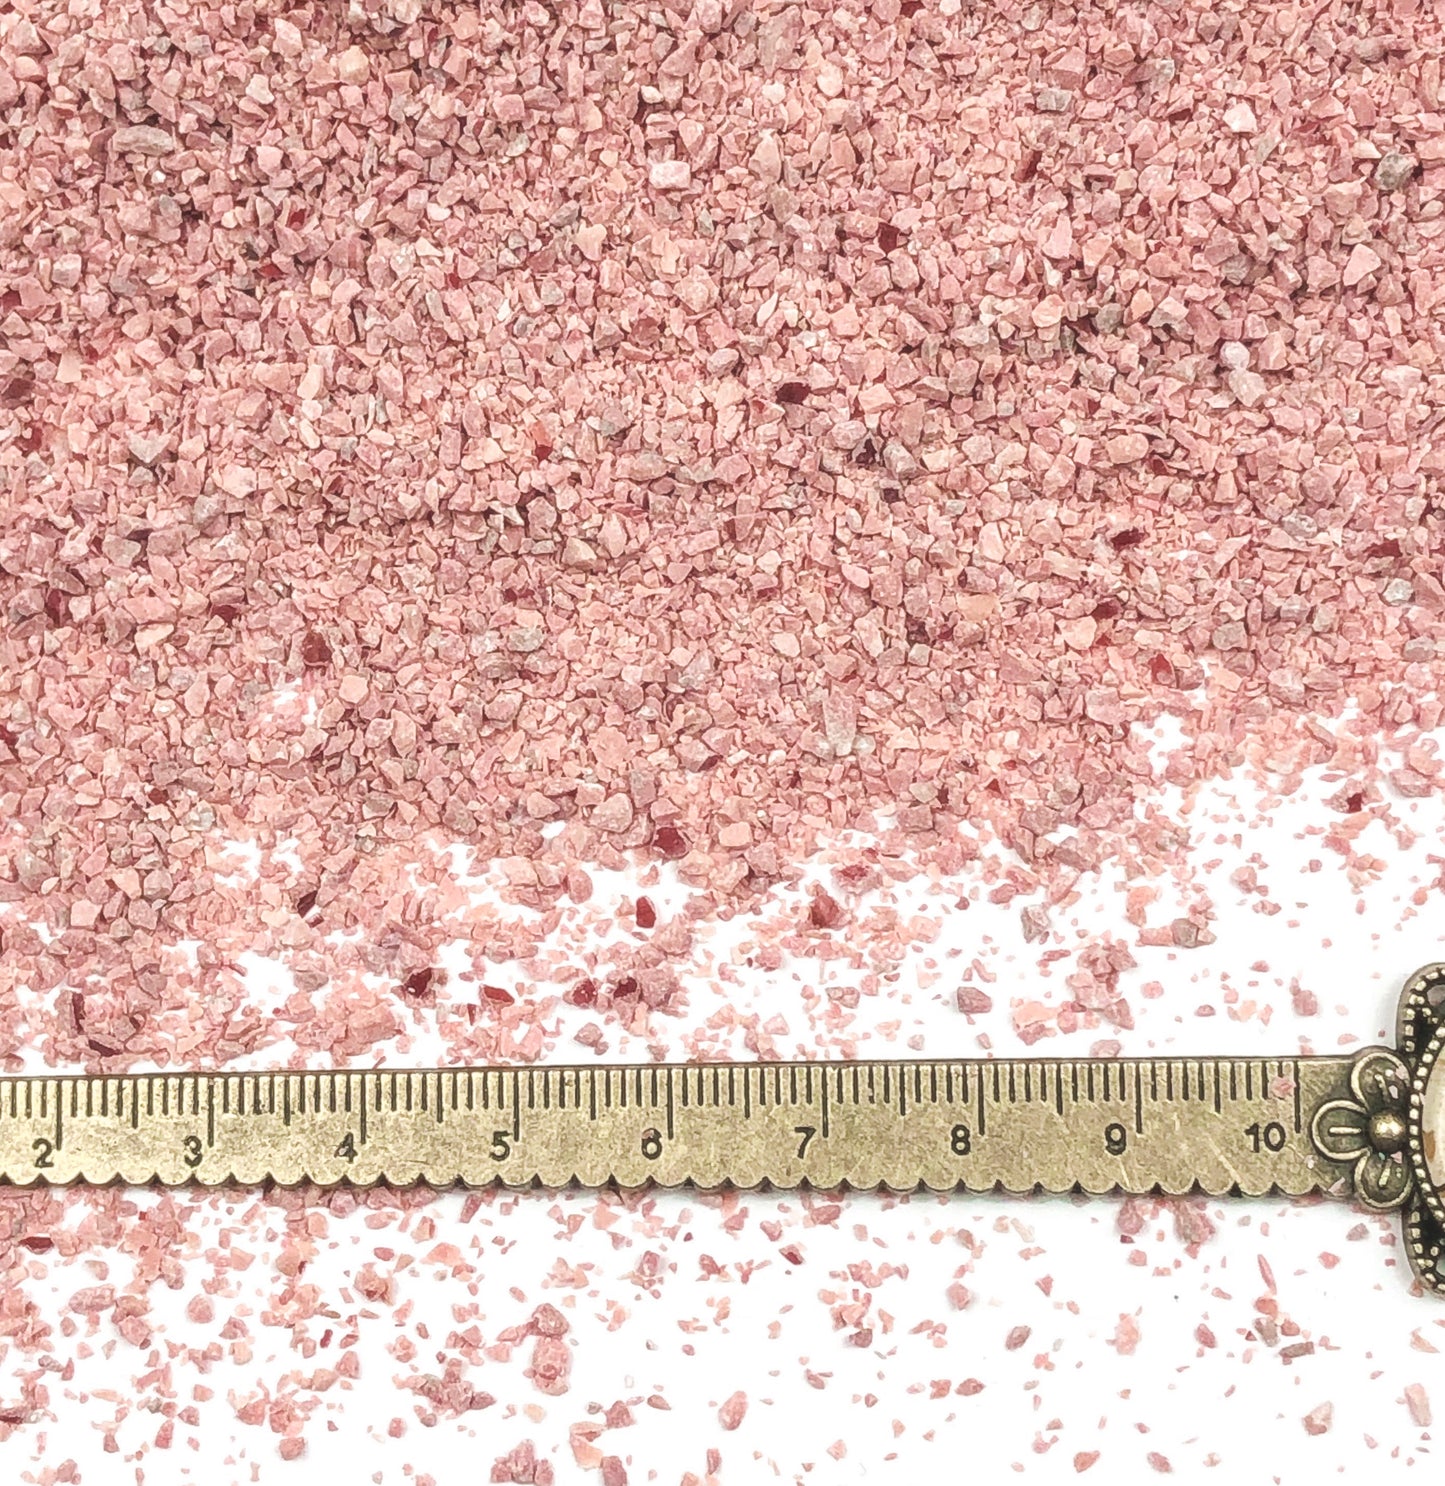 *CLOSEOUT* Crushed Dusty Rose Howlite (Dyed) from Zimbabwe, 2 Ounces, Medium Crush, Sand Size, 2mm - 0.25mm